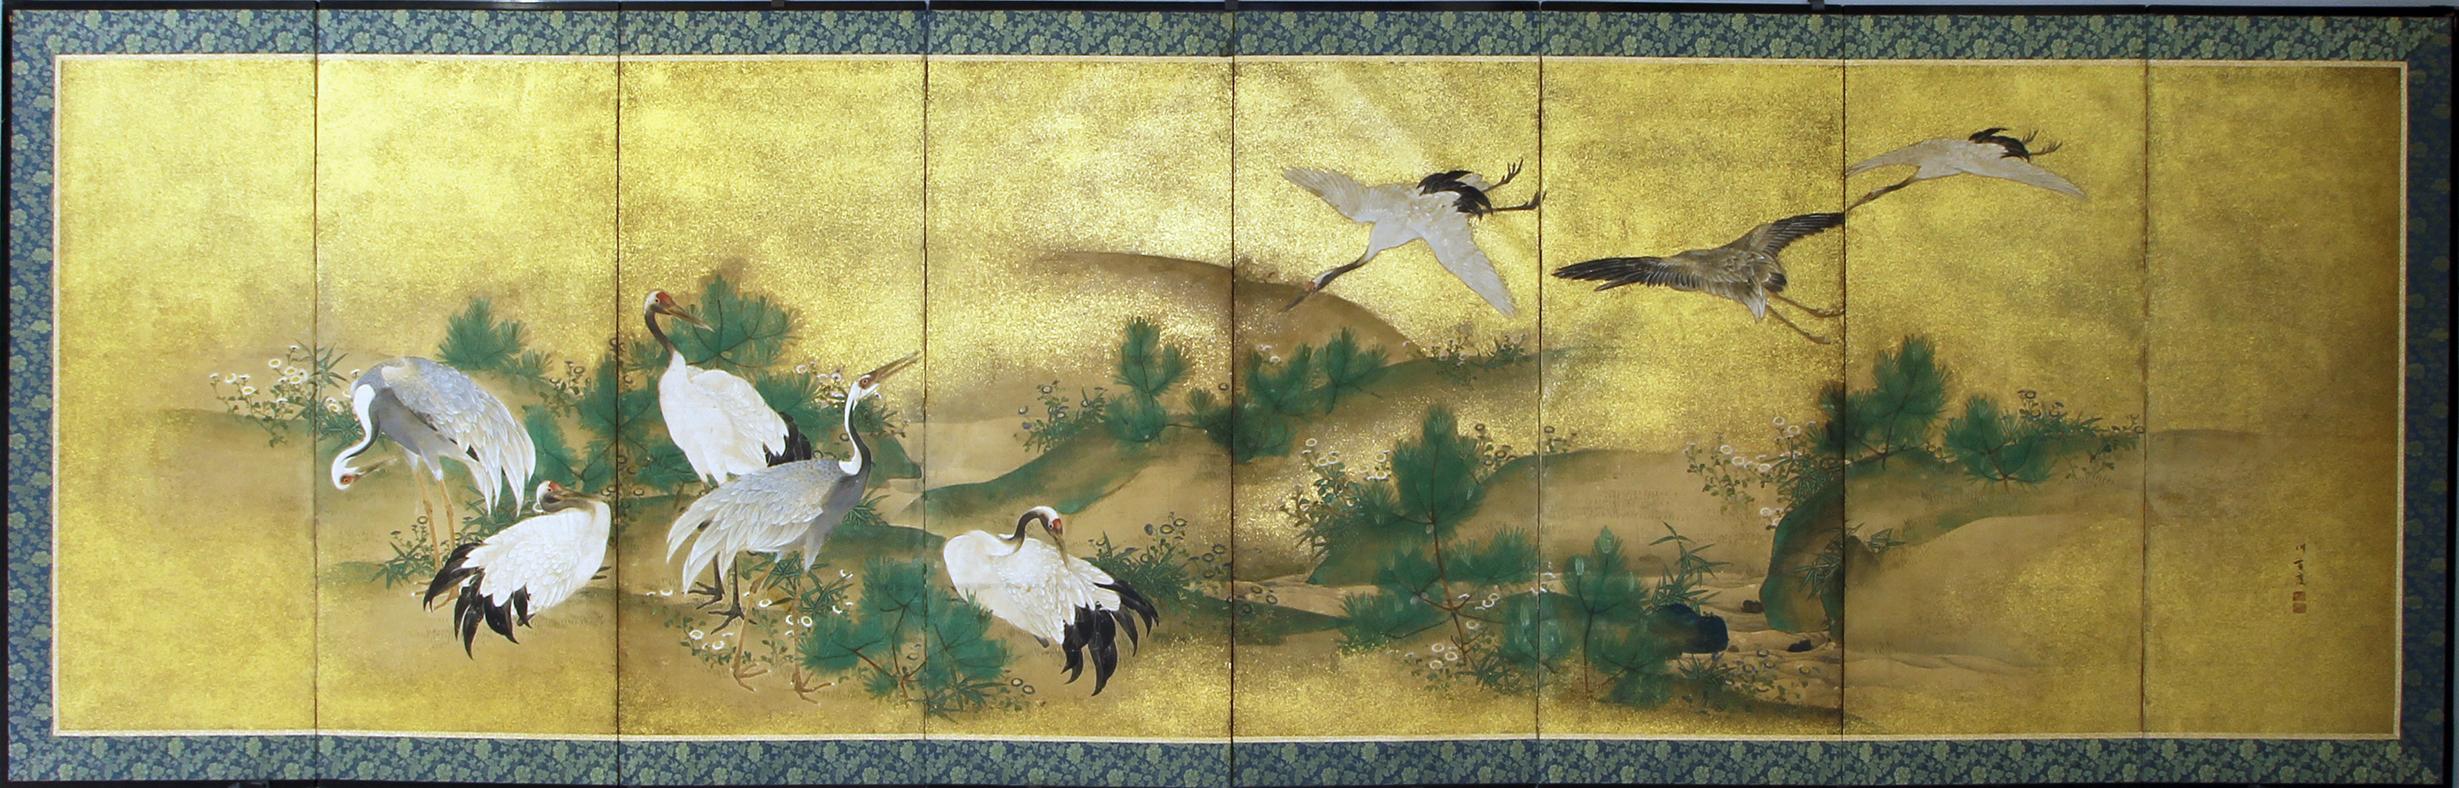 Rare Edo Japanese eight-panel screen painted with mineral pigments on rice paper and golden specks.
Author: Kinsako Wakamatsu.